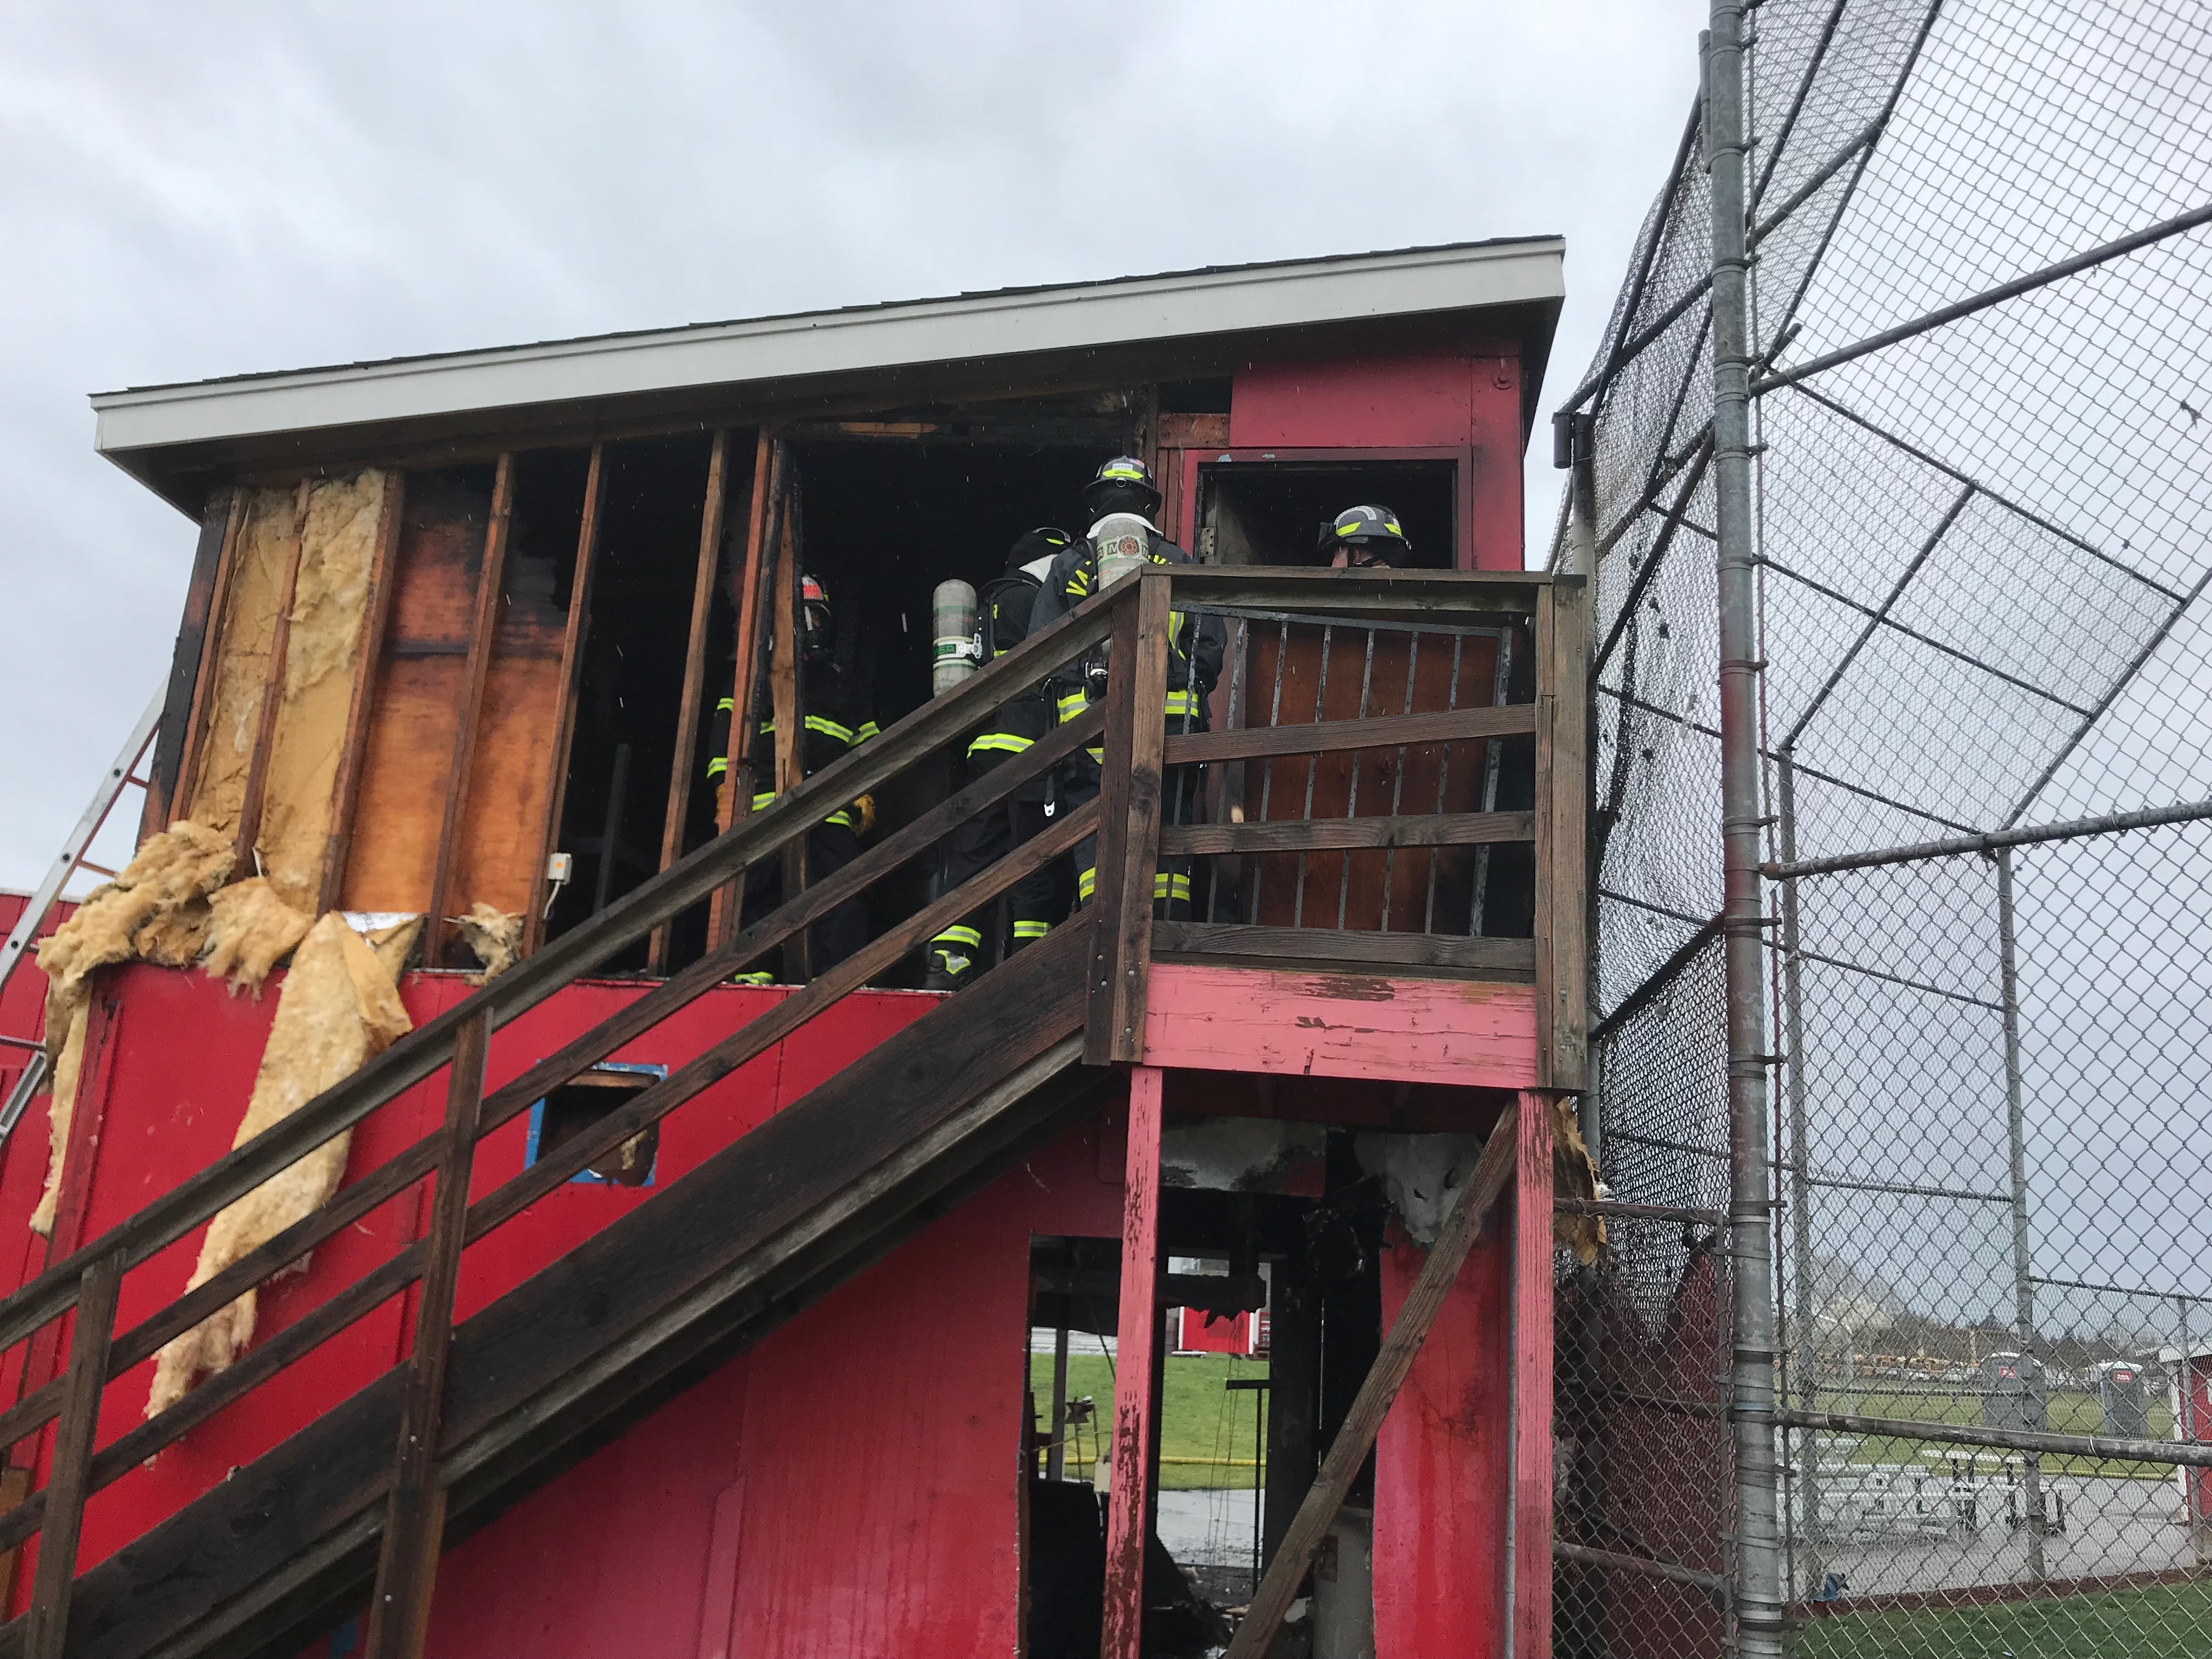 A fire destroyed an Alcoa Little League score tower and all of its contents Wednesday afternoon. The league is now raising money to replace gear and prepare for upcoming games. The cause of the fire remains under investigation.